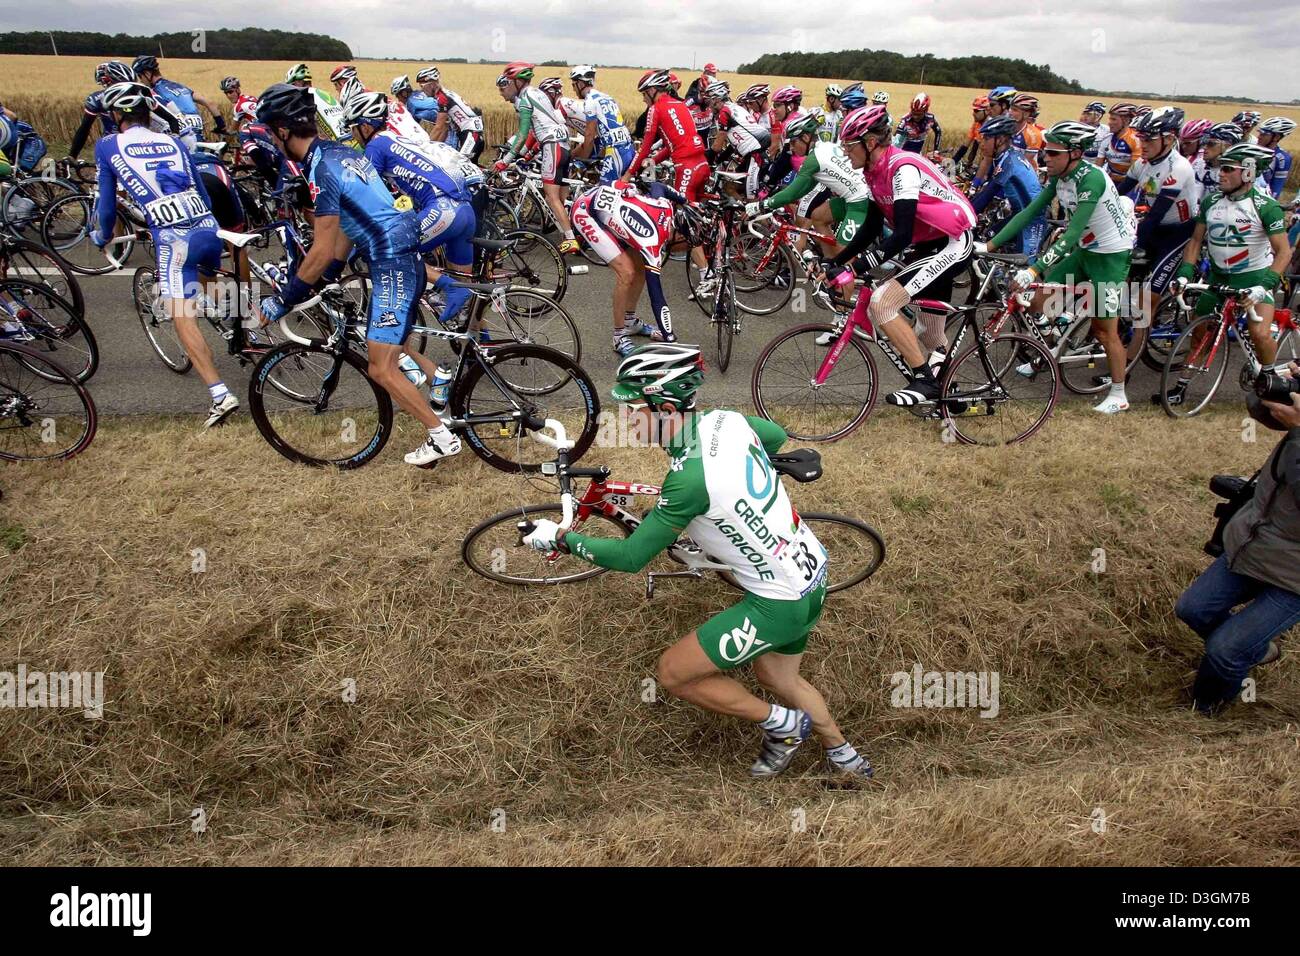 (dpa) - Several cyclists have to bypass other riders who fell with their bicycles during the 6th stage of the Tour de France near Bonneval France, 09 July 2004. In the ditch New Zealand's cyclist Juian Dean of Team Credit Agricole. Among those who fell off their bicycles was US rider Lance Armstrong of Team US Postal Service but he managed to catch up again with the help of his tea Stock Photo